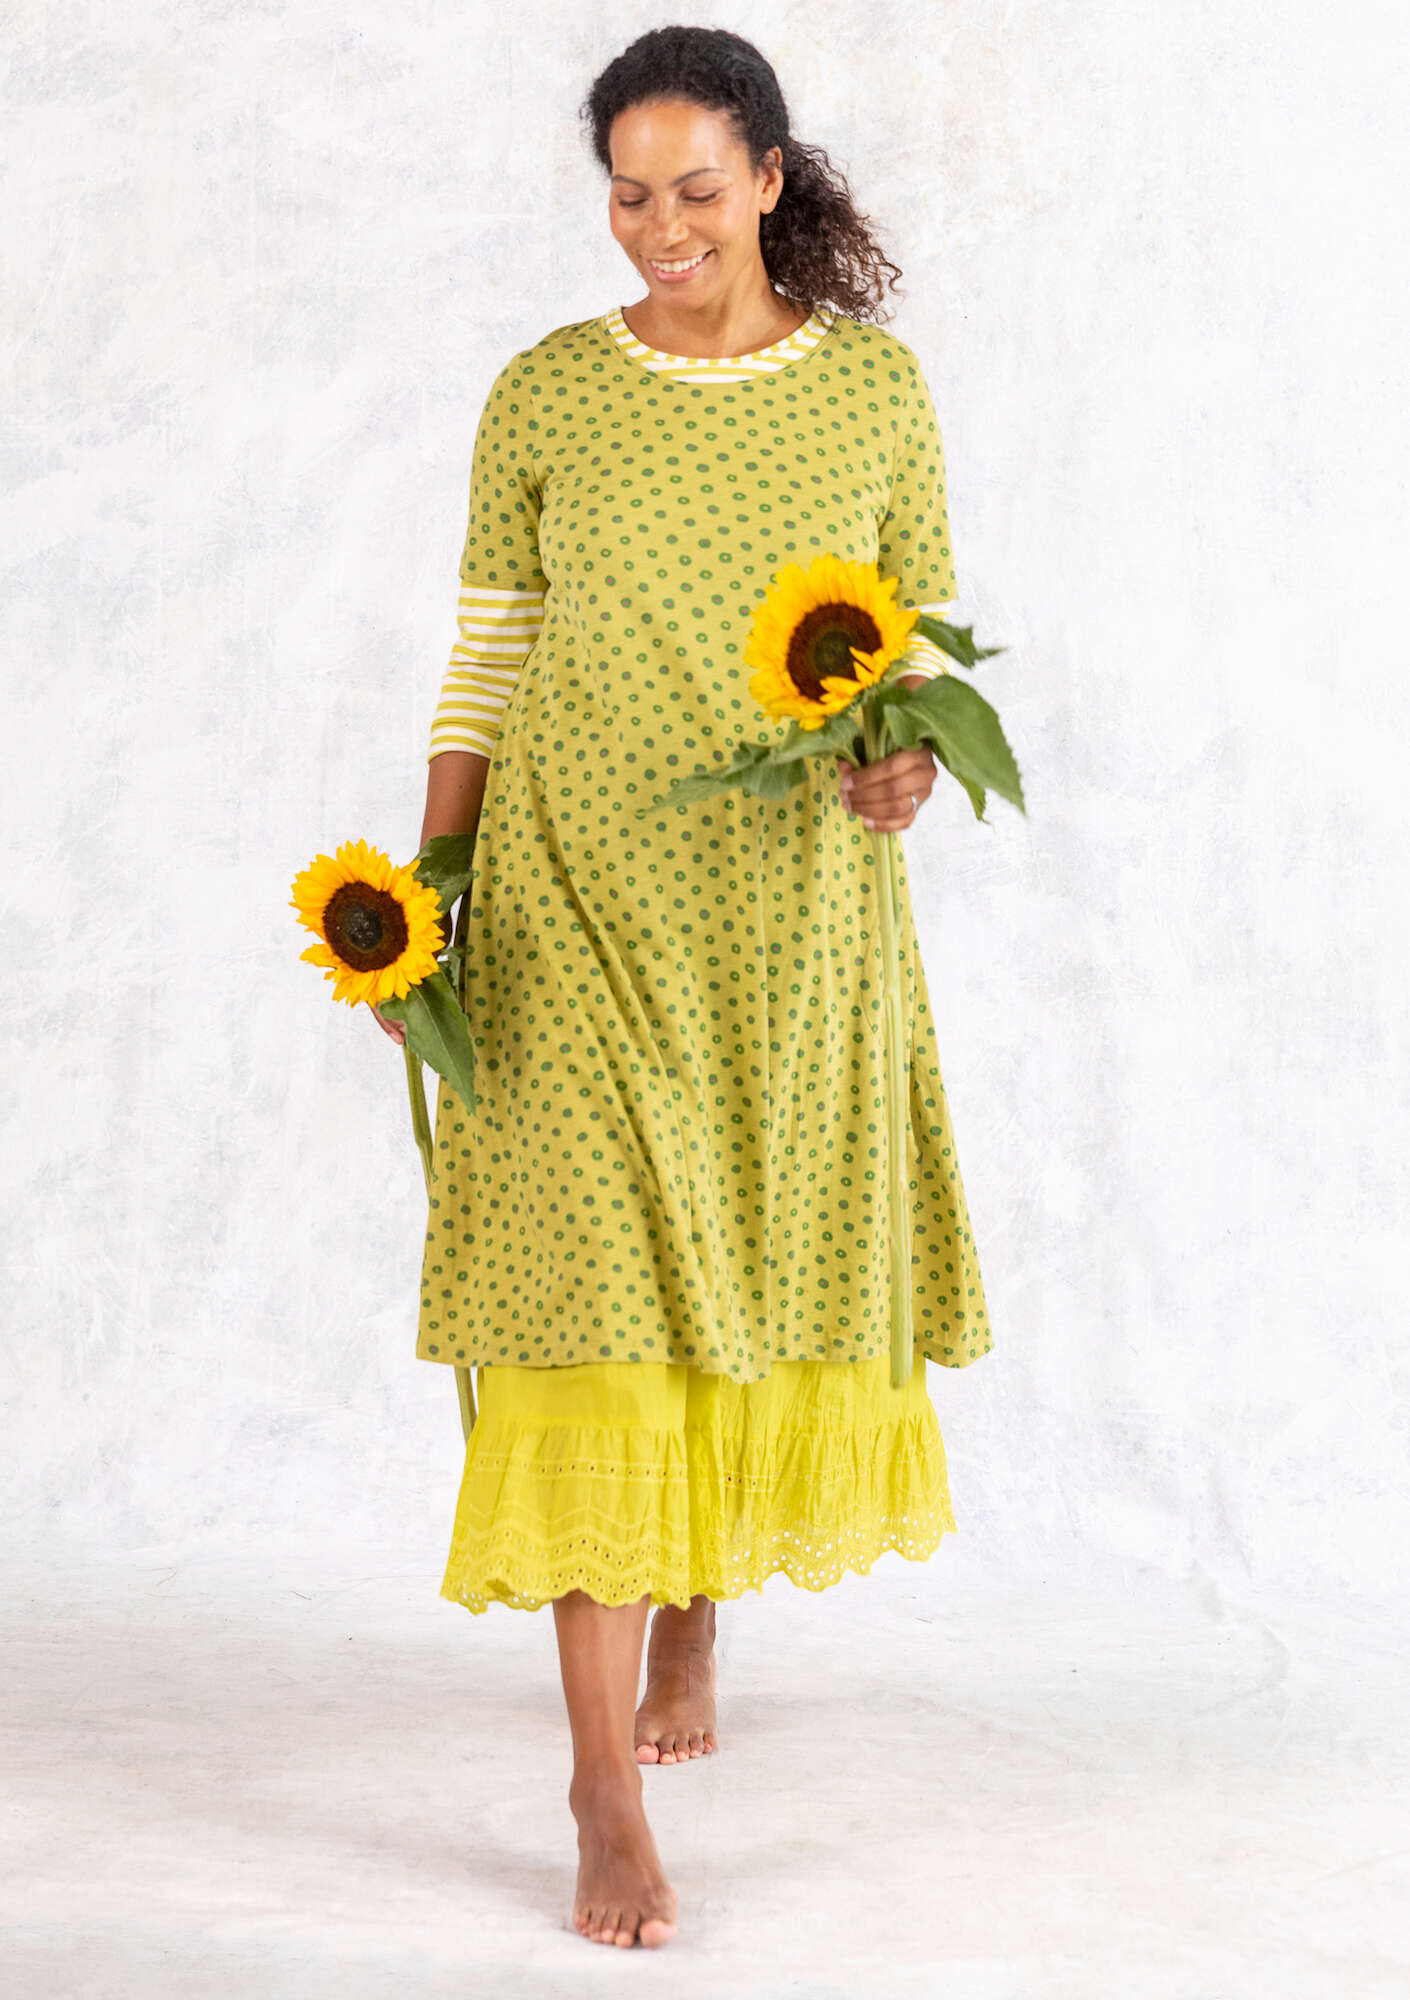 “Ines” jersey dress in organic cotton guava/patterned